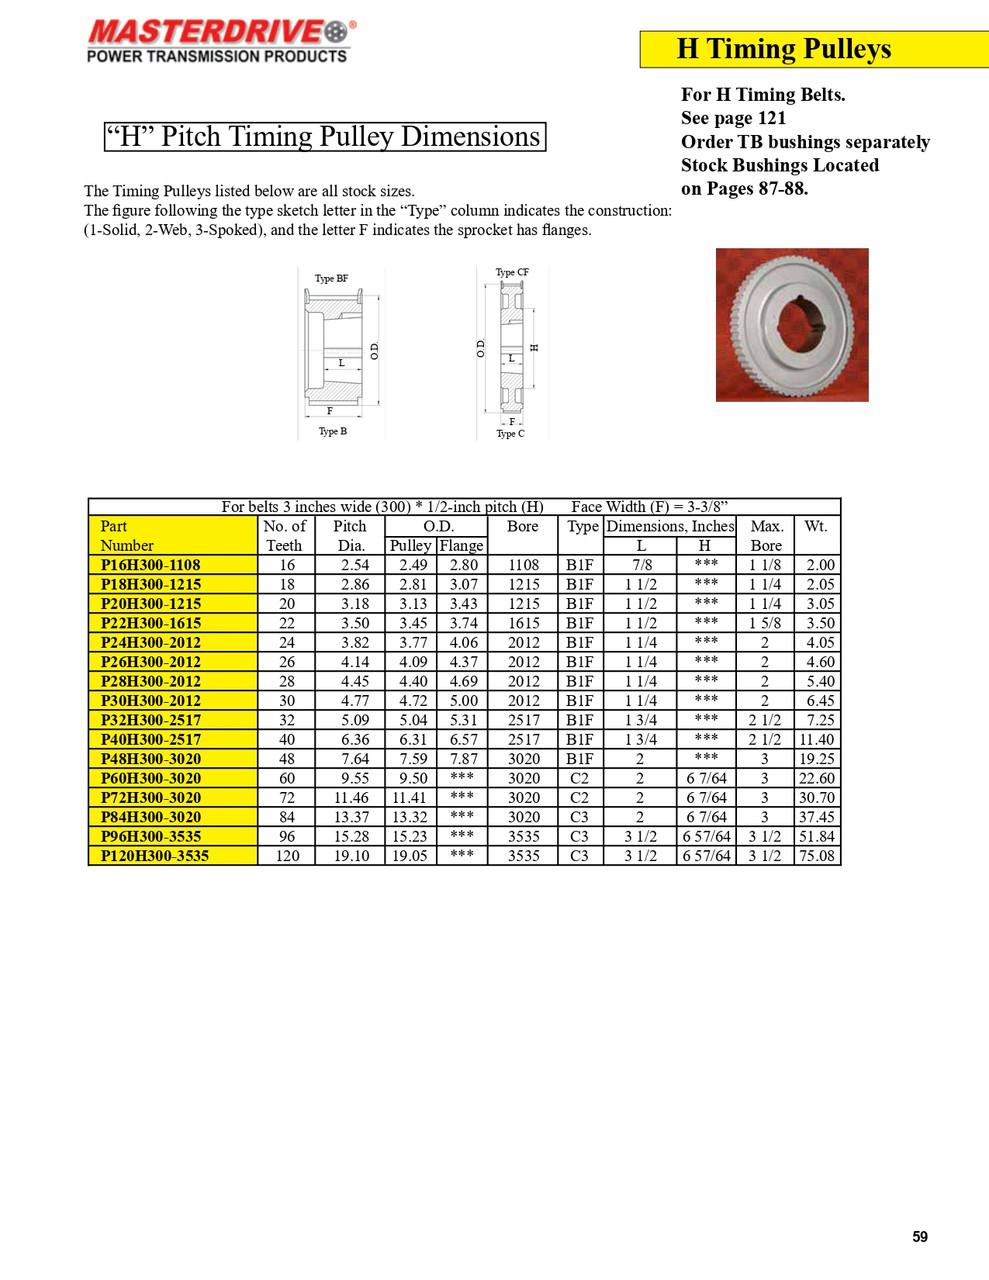 24 Tooth "H" Pitch "TB" Timing Pulley  P24H300-2012